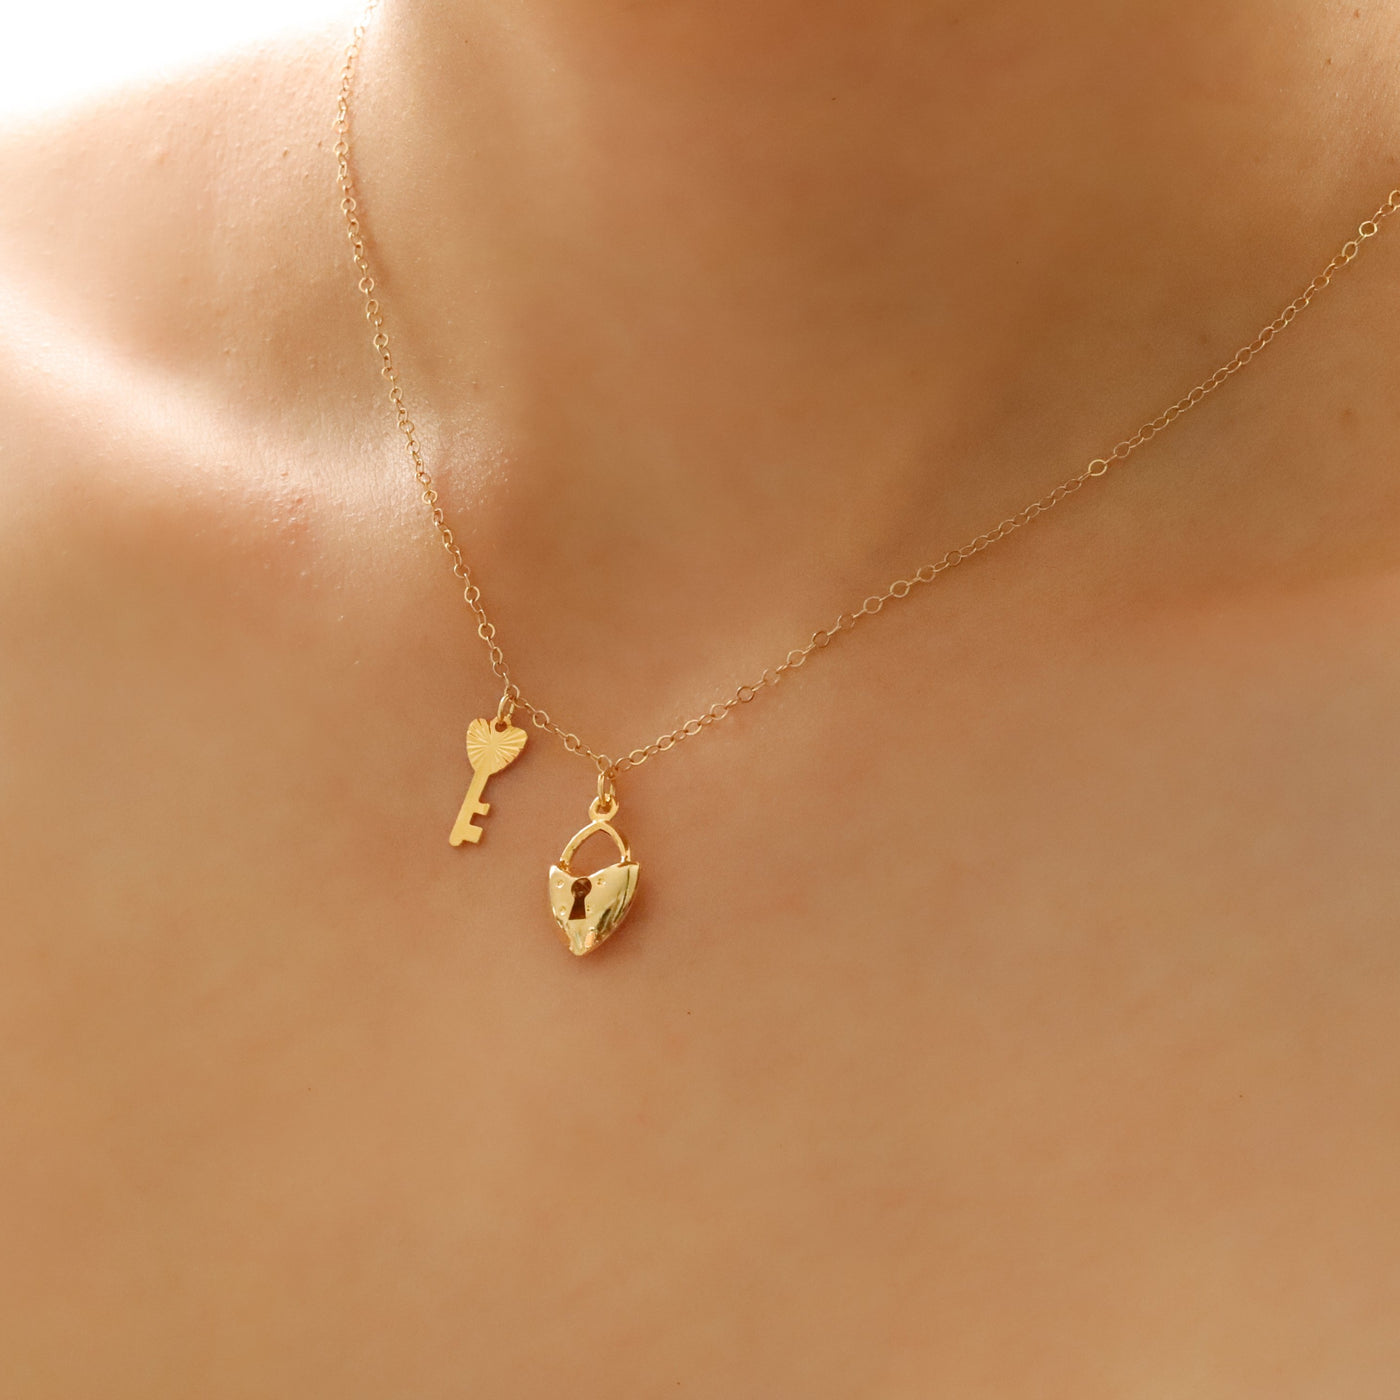 Gold filled heart lock and key pendant necklace for everyday wear